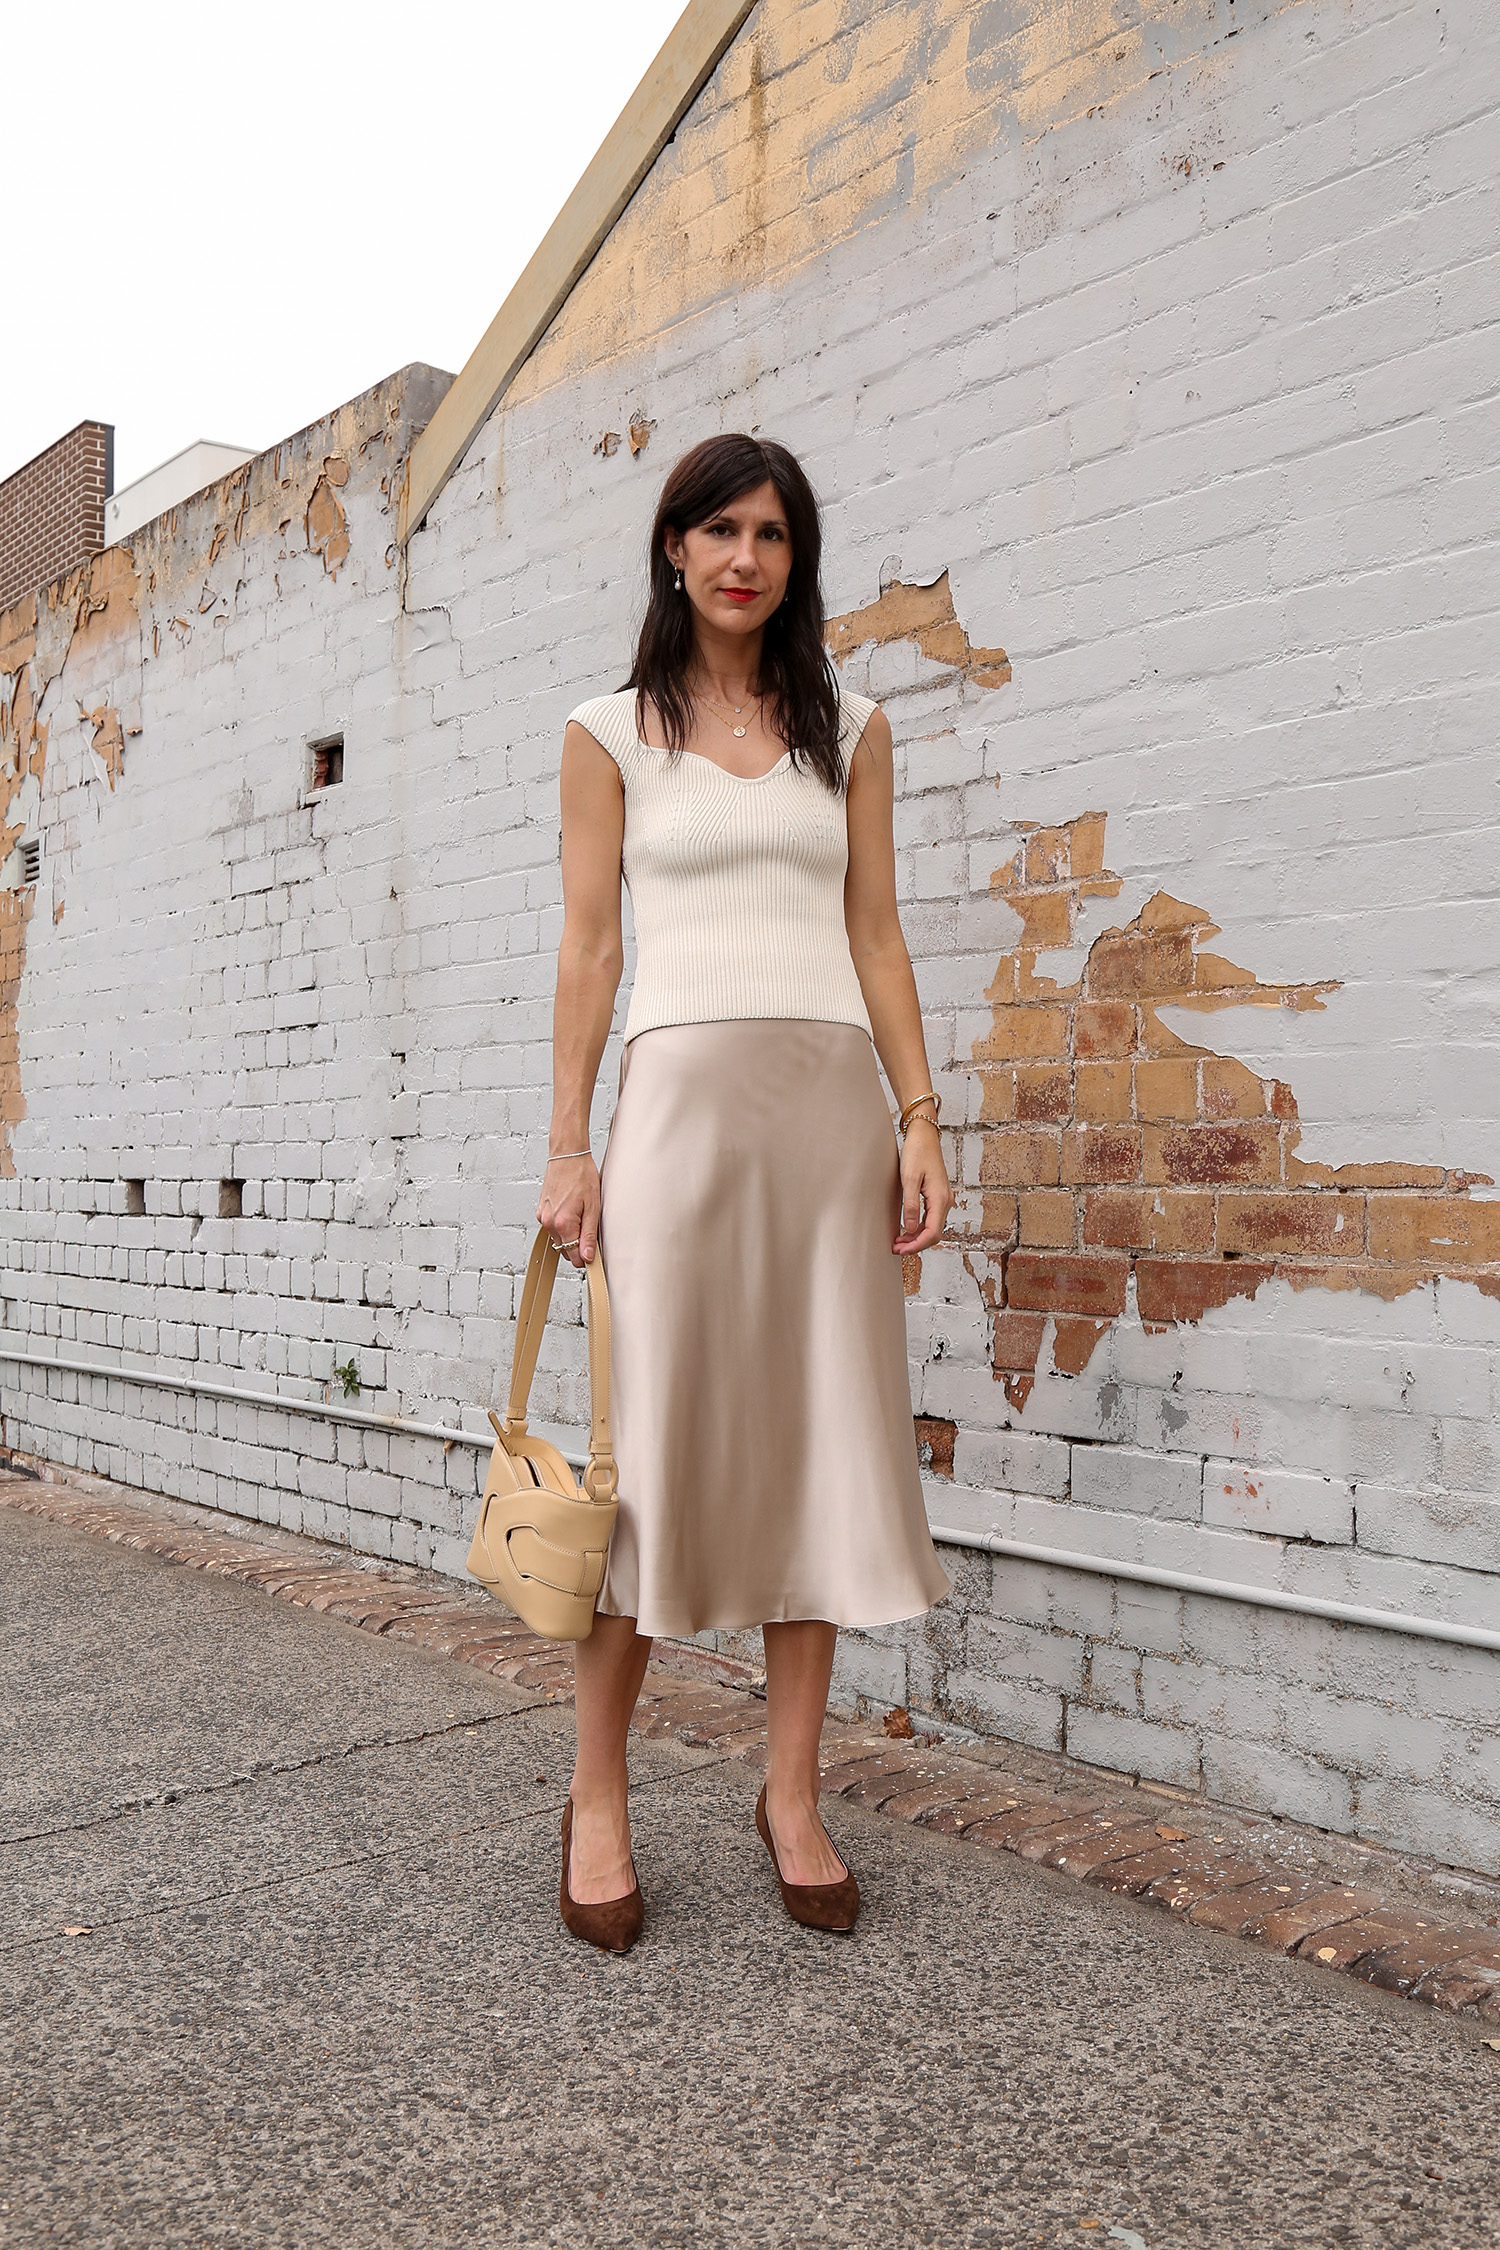 Minimal neutral outfit quiet luxury style